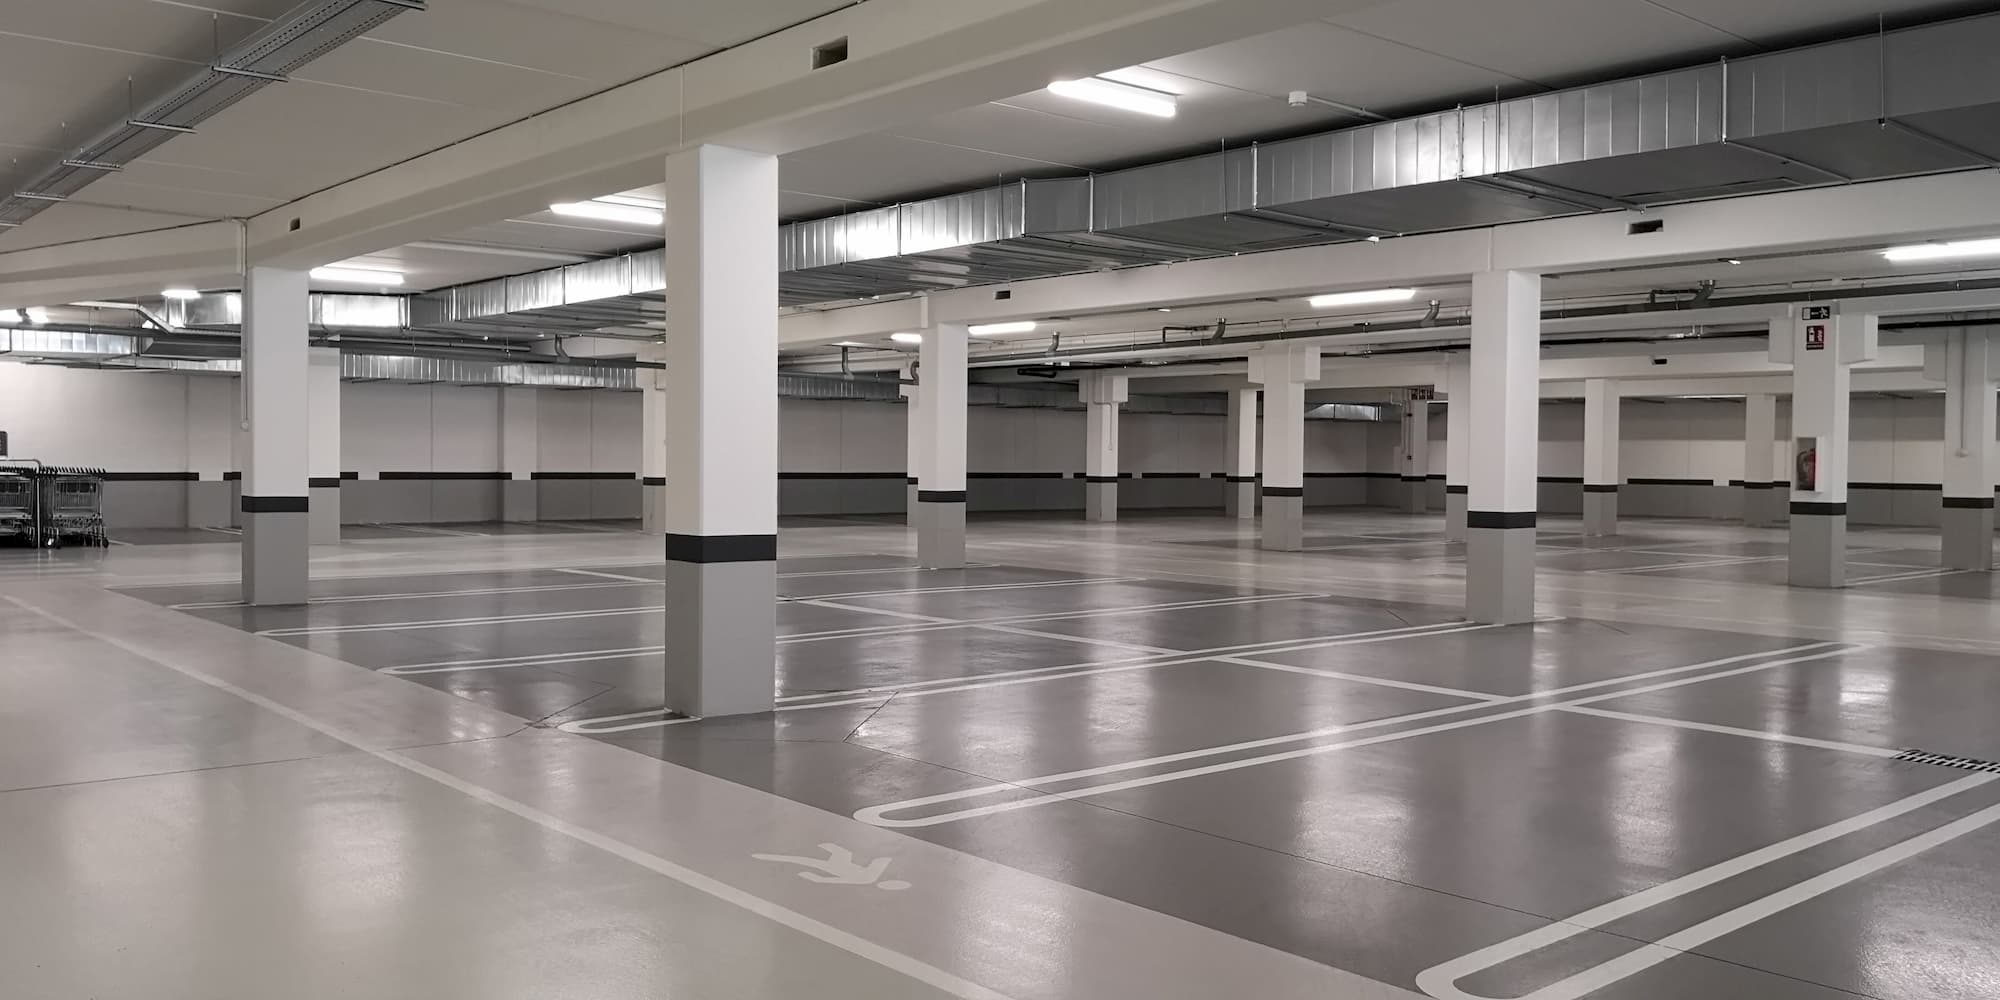 Why Power Washing Is The Best Maintenance Plan for Parkades